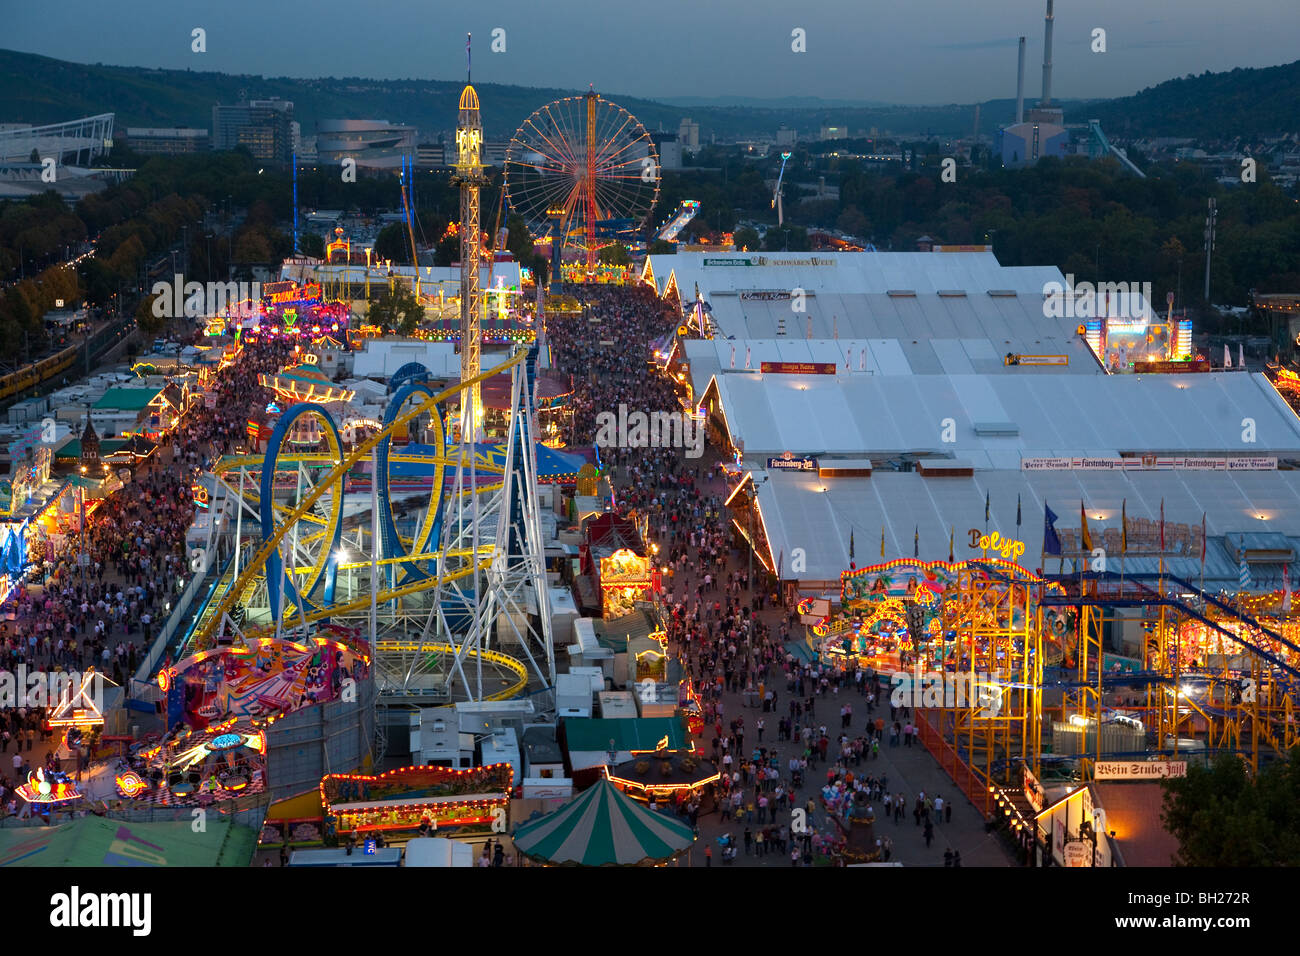 RIDES AND BEER TENTS AT CANNSTATTER VOLKSFEST FOLK FESTIVAL IN STUTTGART, GERMANY Stock Photo